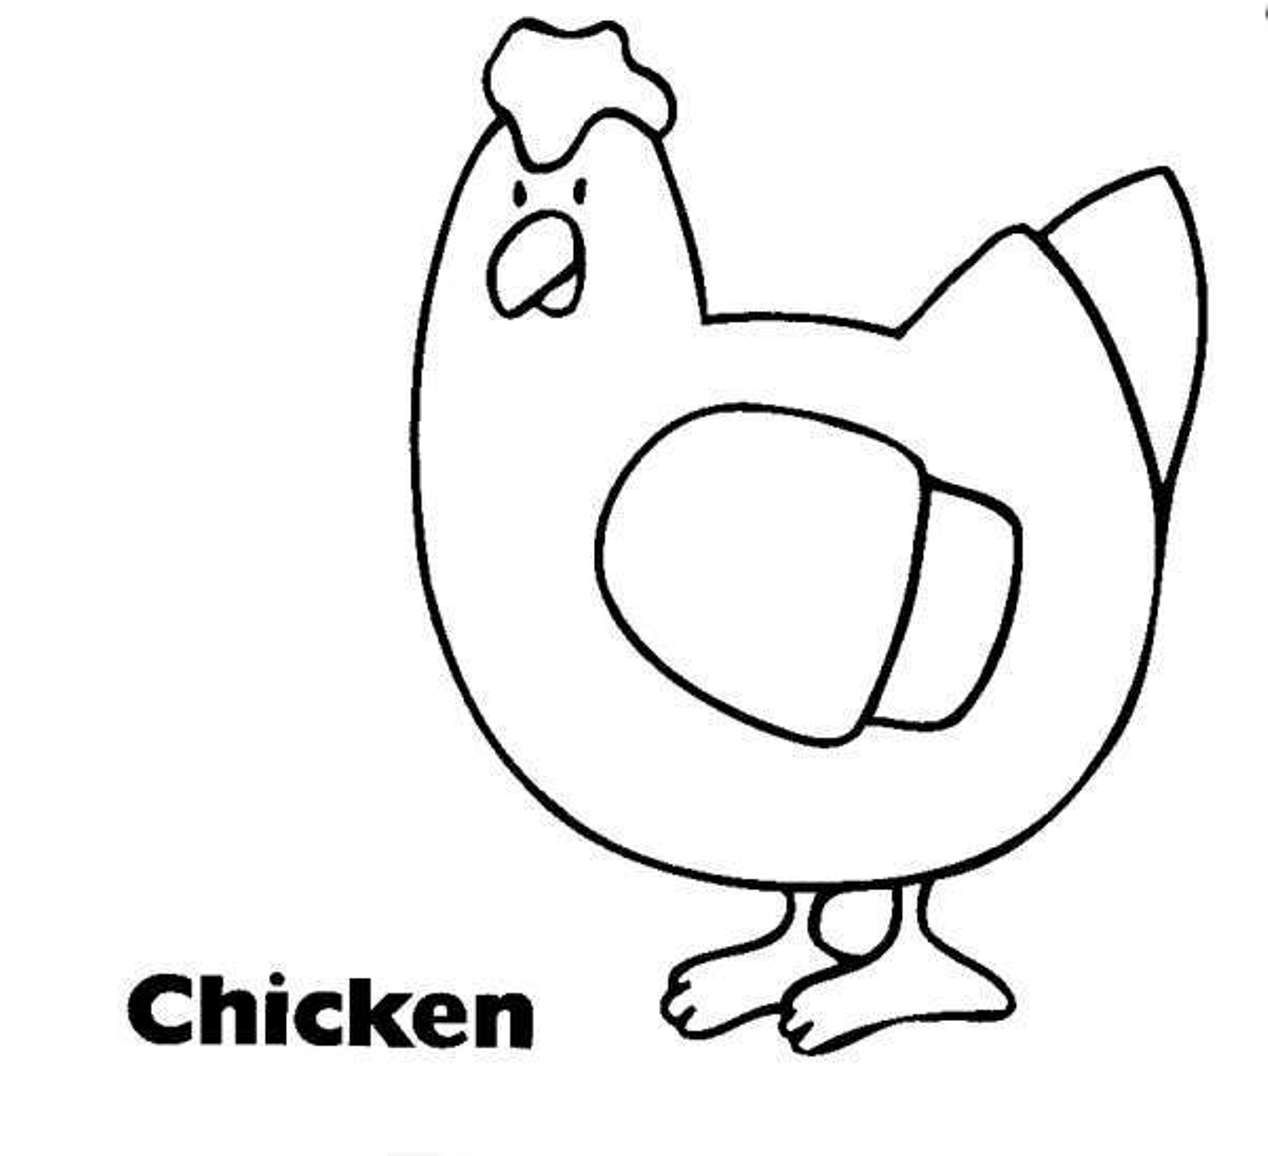 Farm Animal Coloring Pages Chicken Printable | Animal Coloring ...